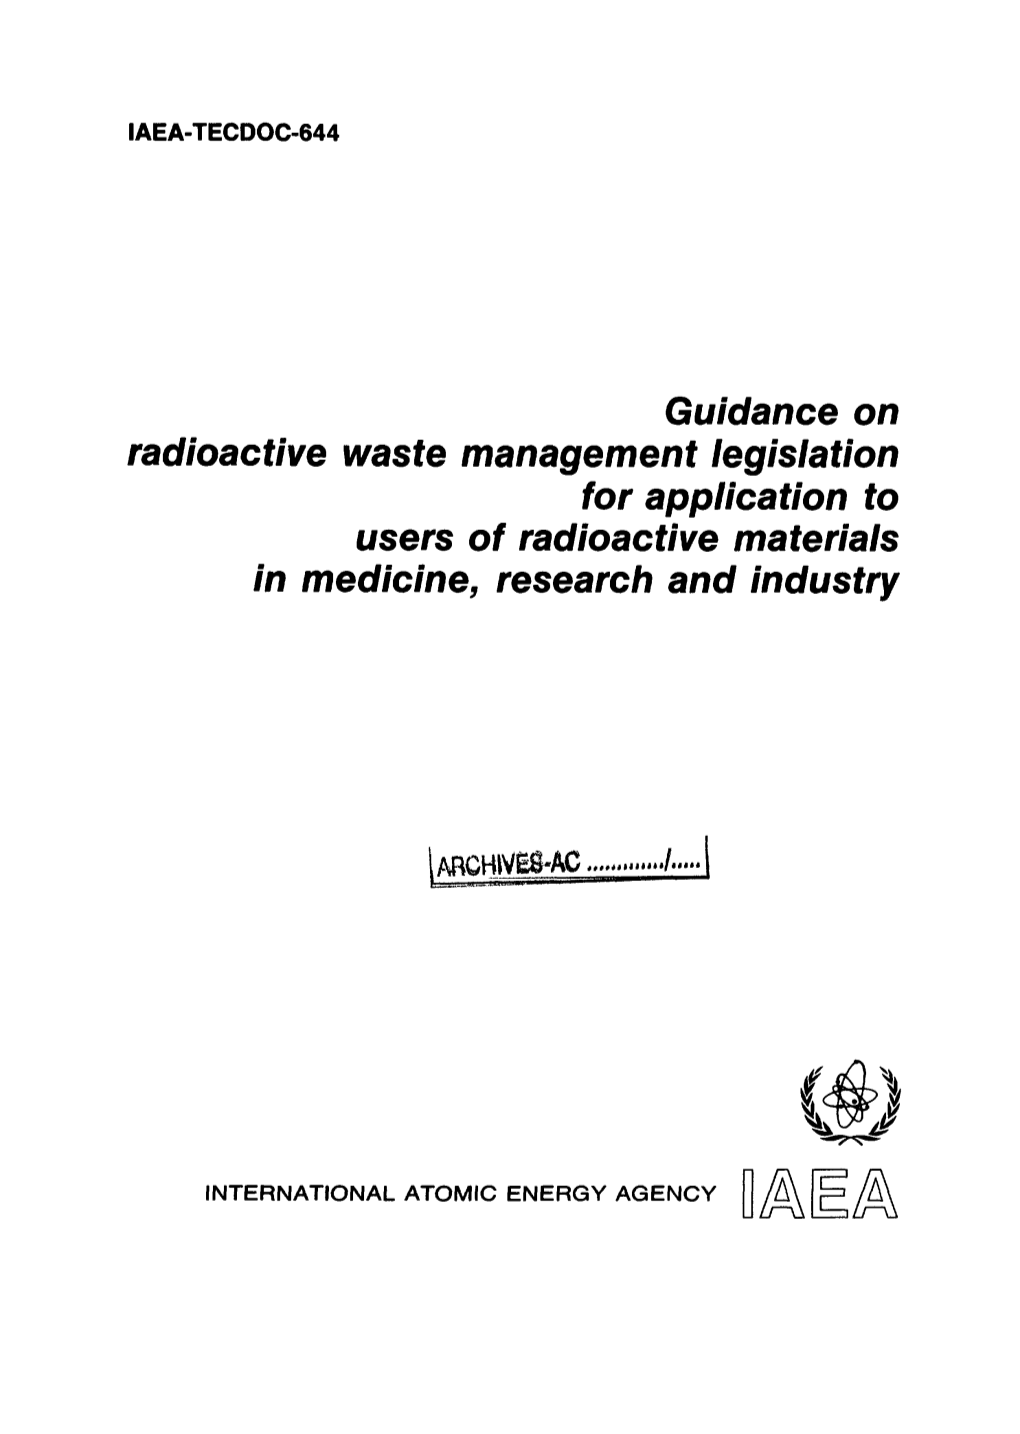 Guidance on Radioactive Waste Management Legislation for Applicationto Users of Radioactive Materials Medicine,In Research Industryand